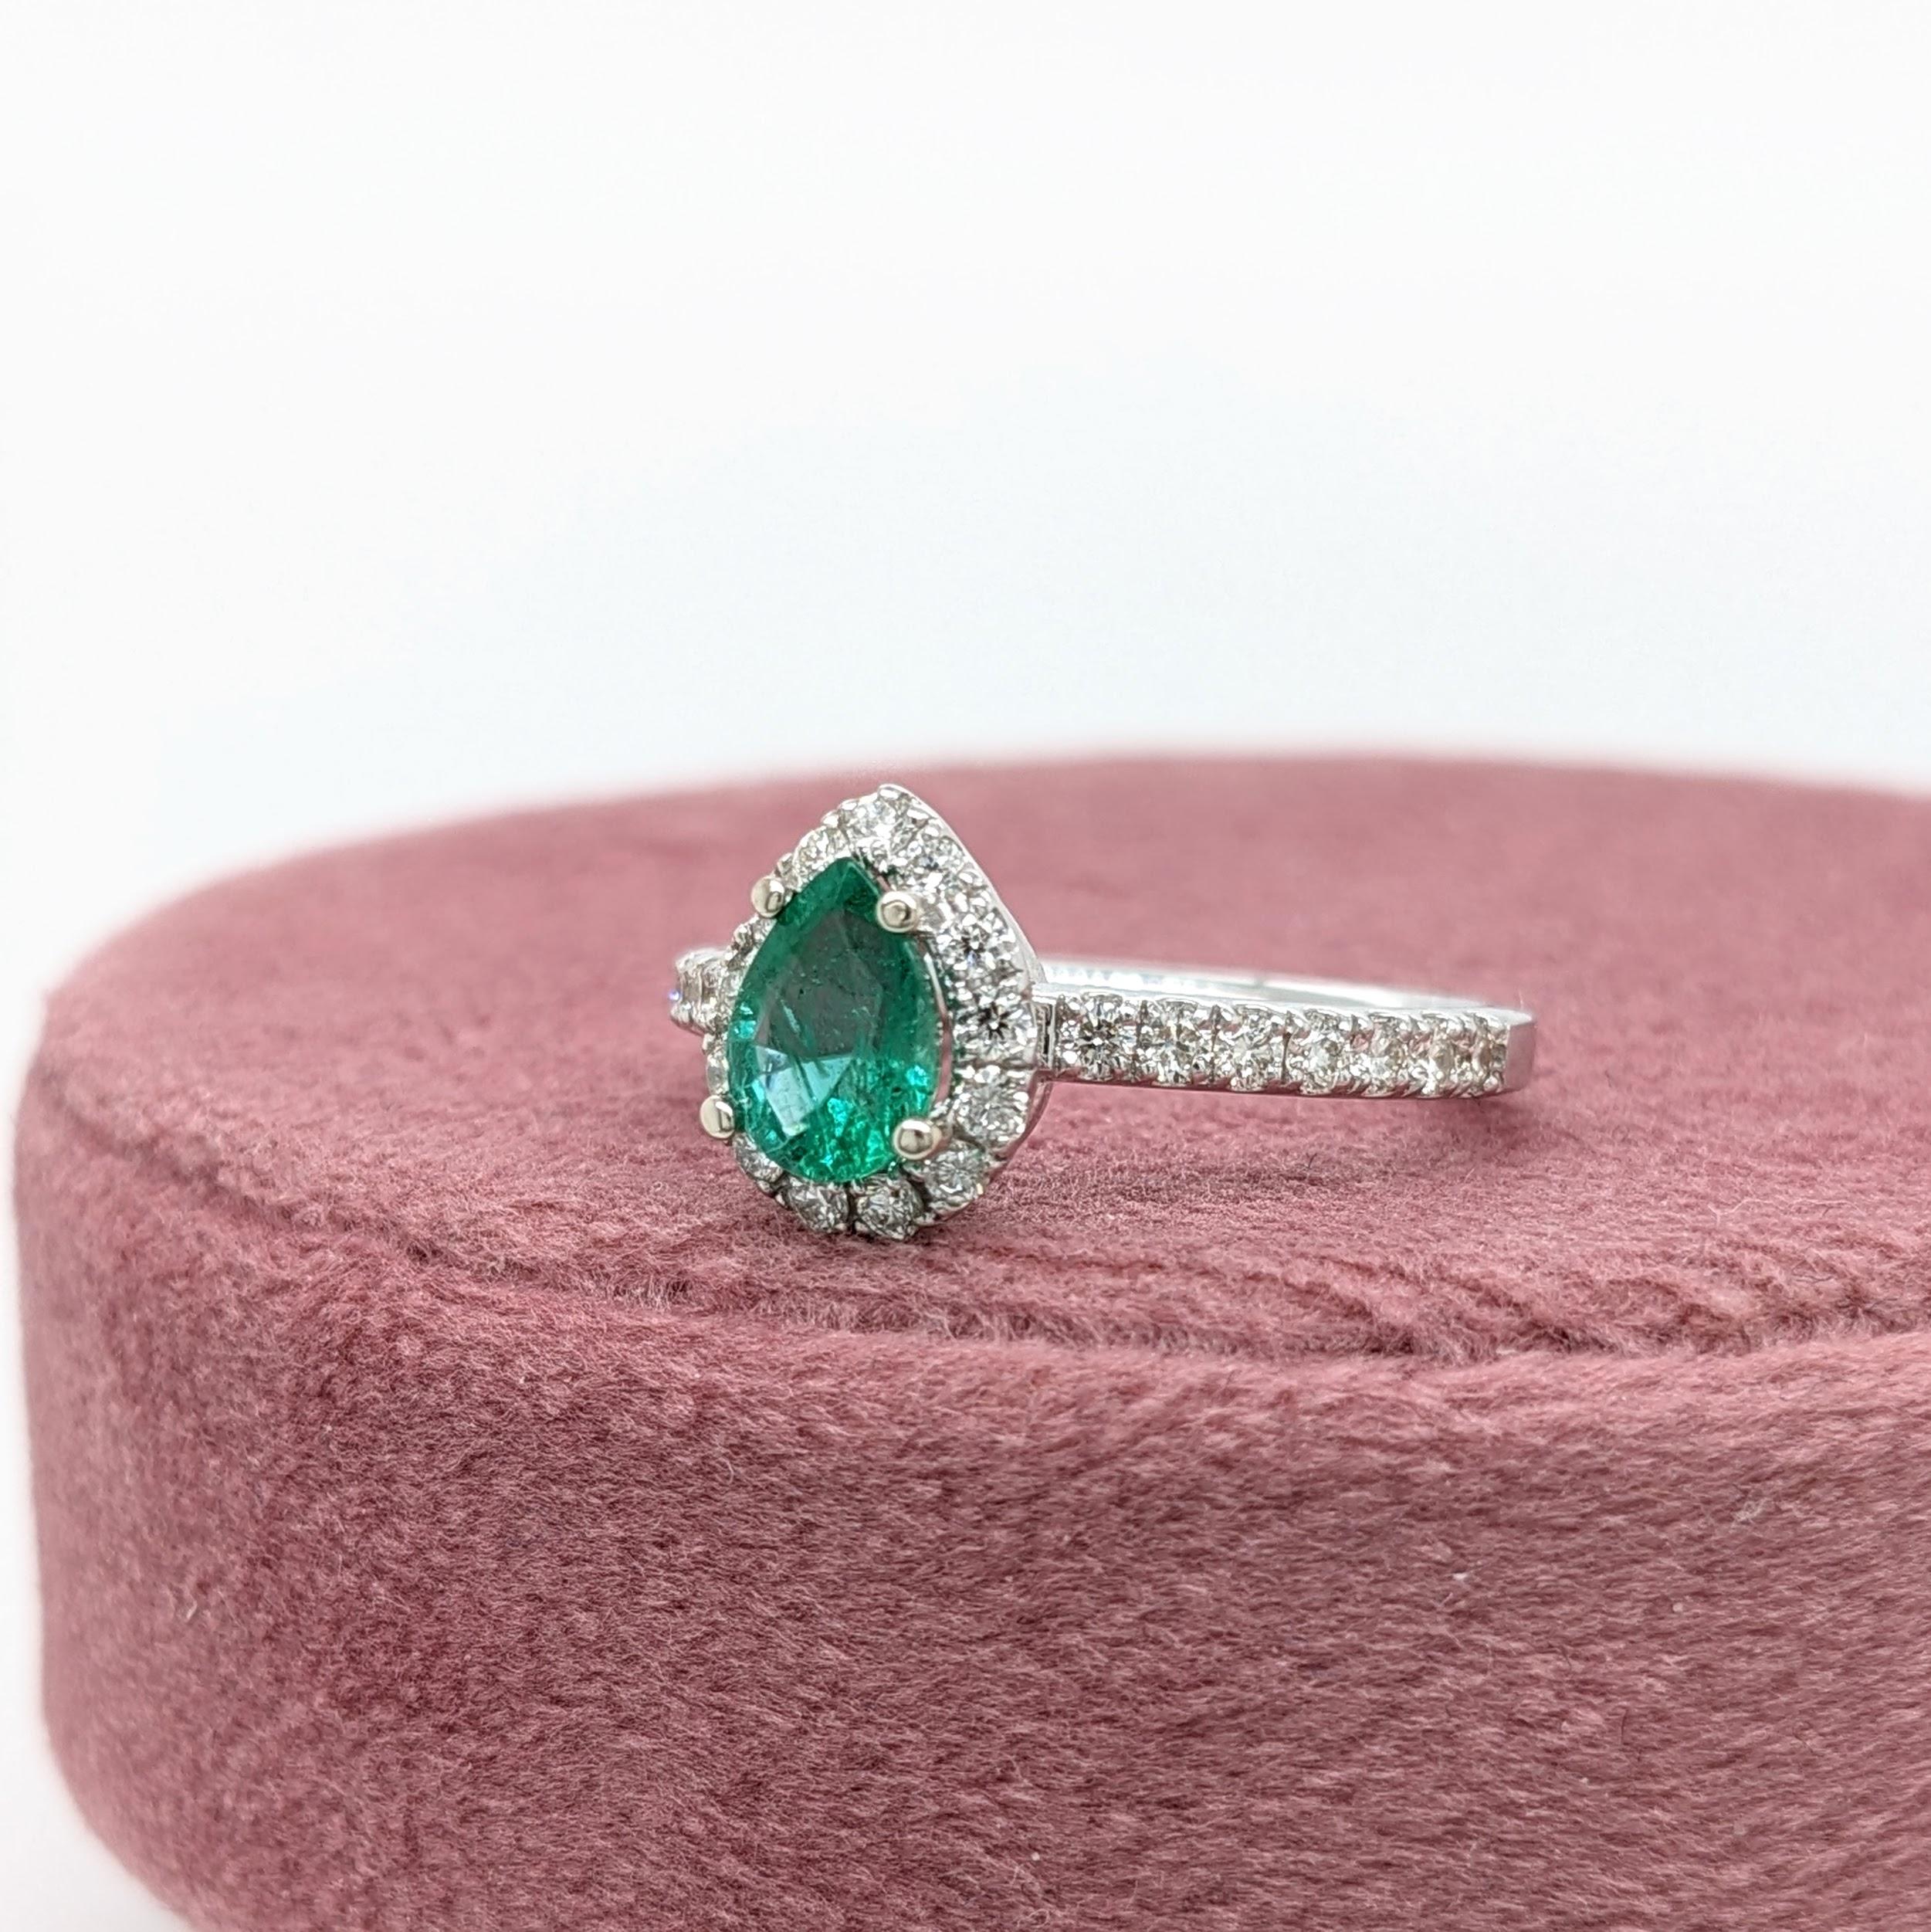 Modernist Emerald Ring w Natural Diamond Halo in 14K Solid White Gold Pear Cut 7x5mm For Sale